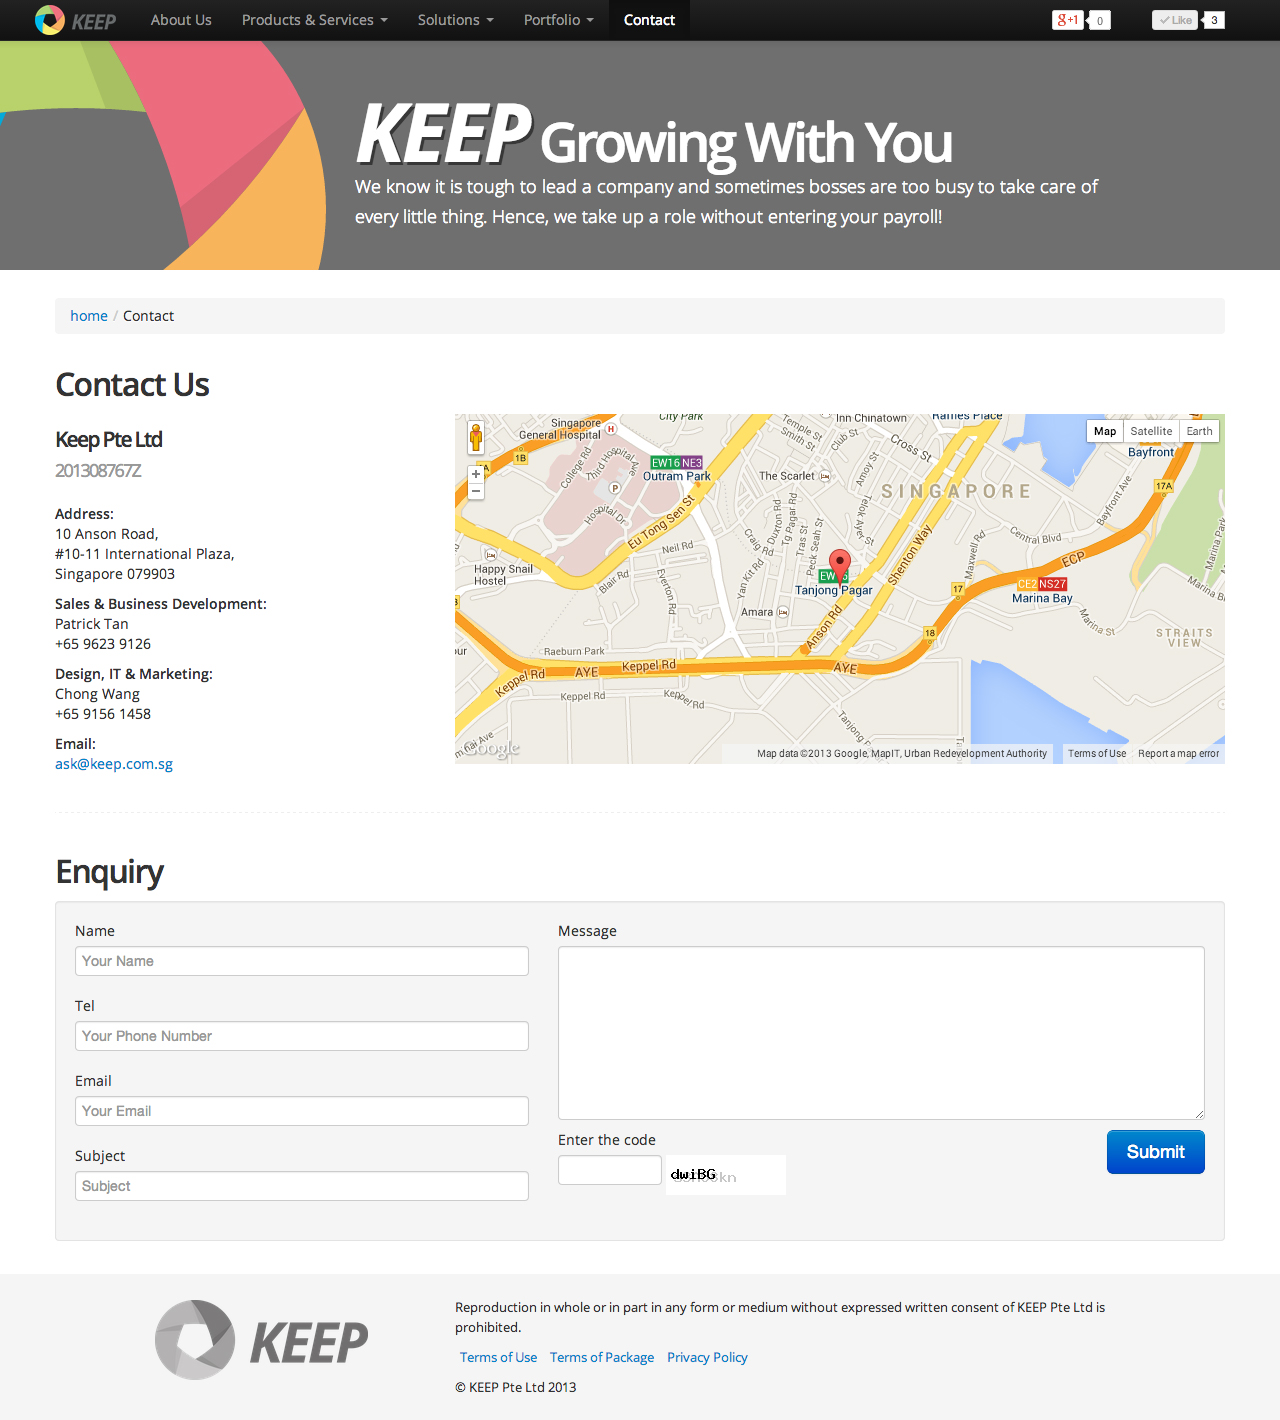 Keep Pte Ltd website contact us page